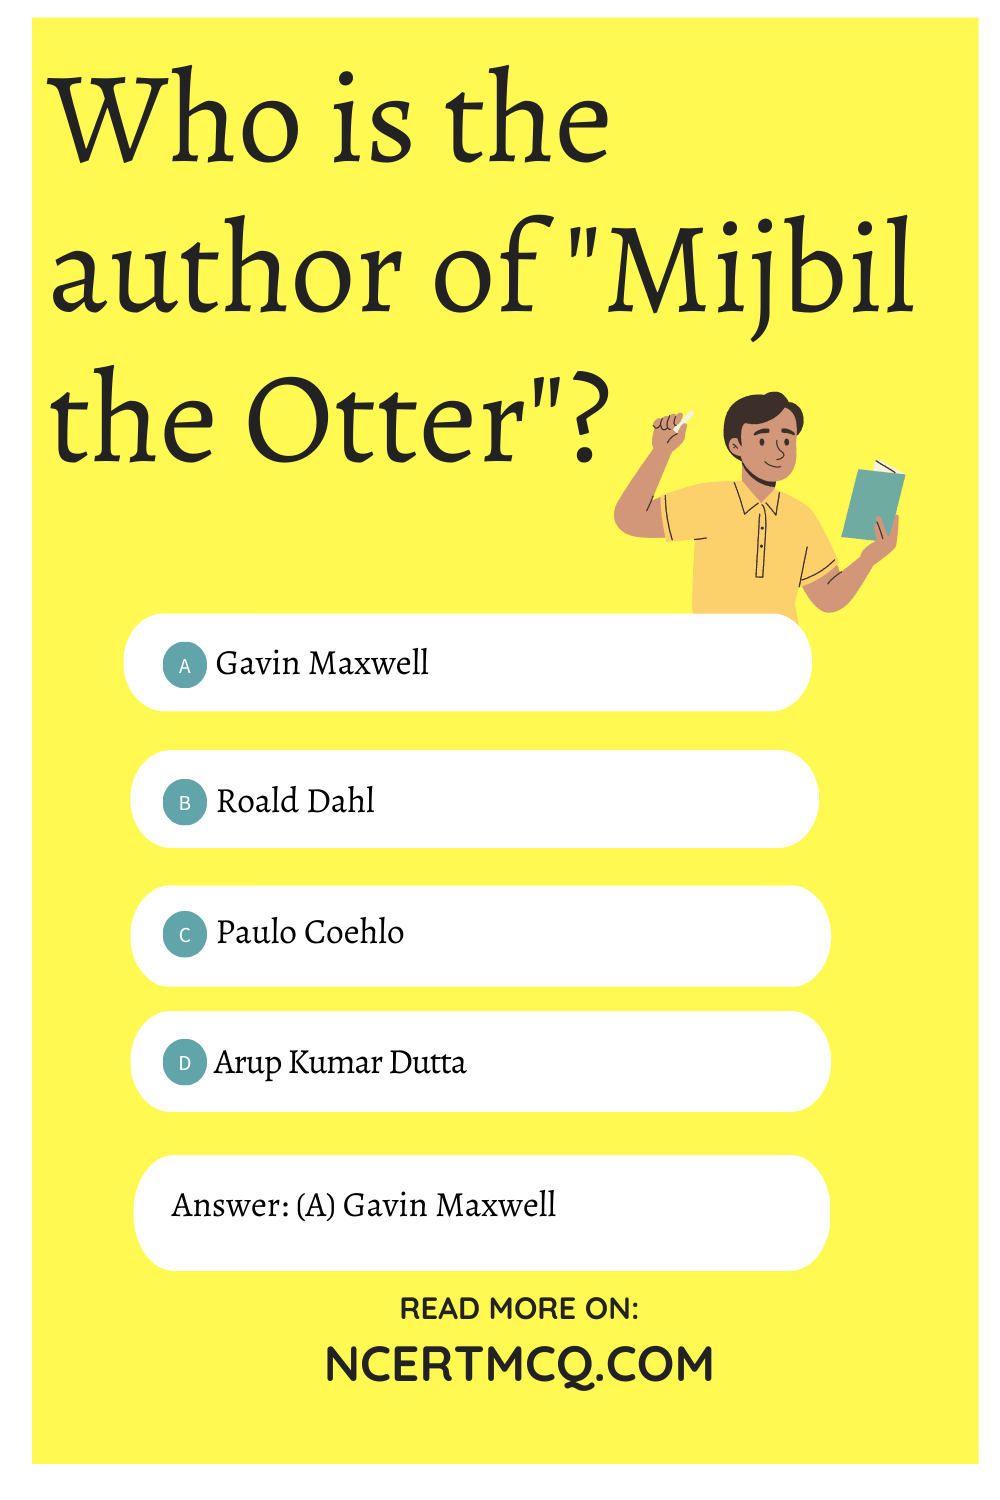 Who is the author of "Mijbil the Otter"?